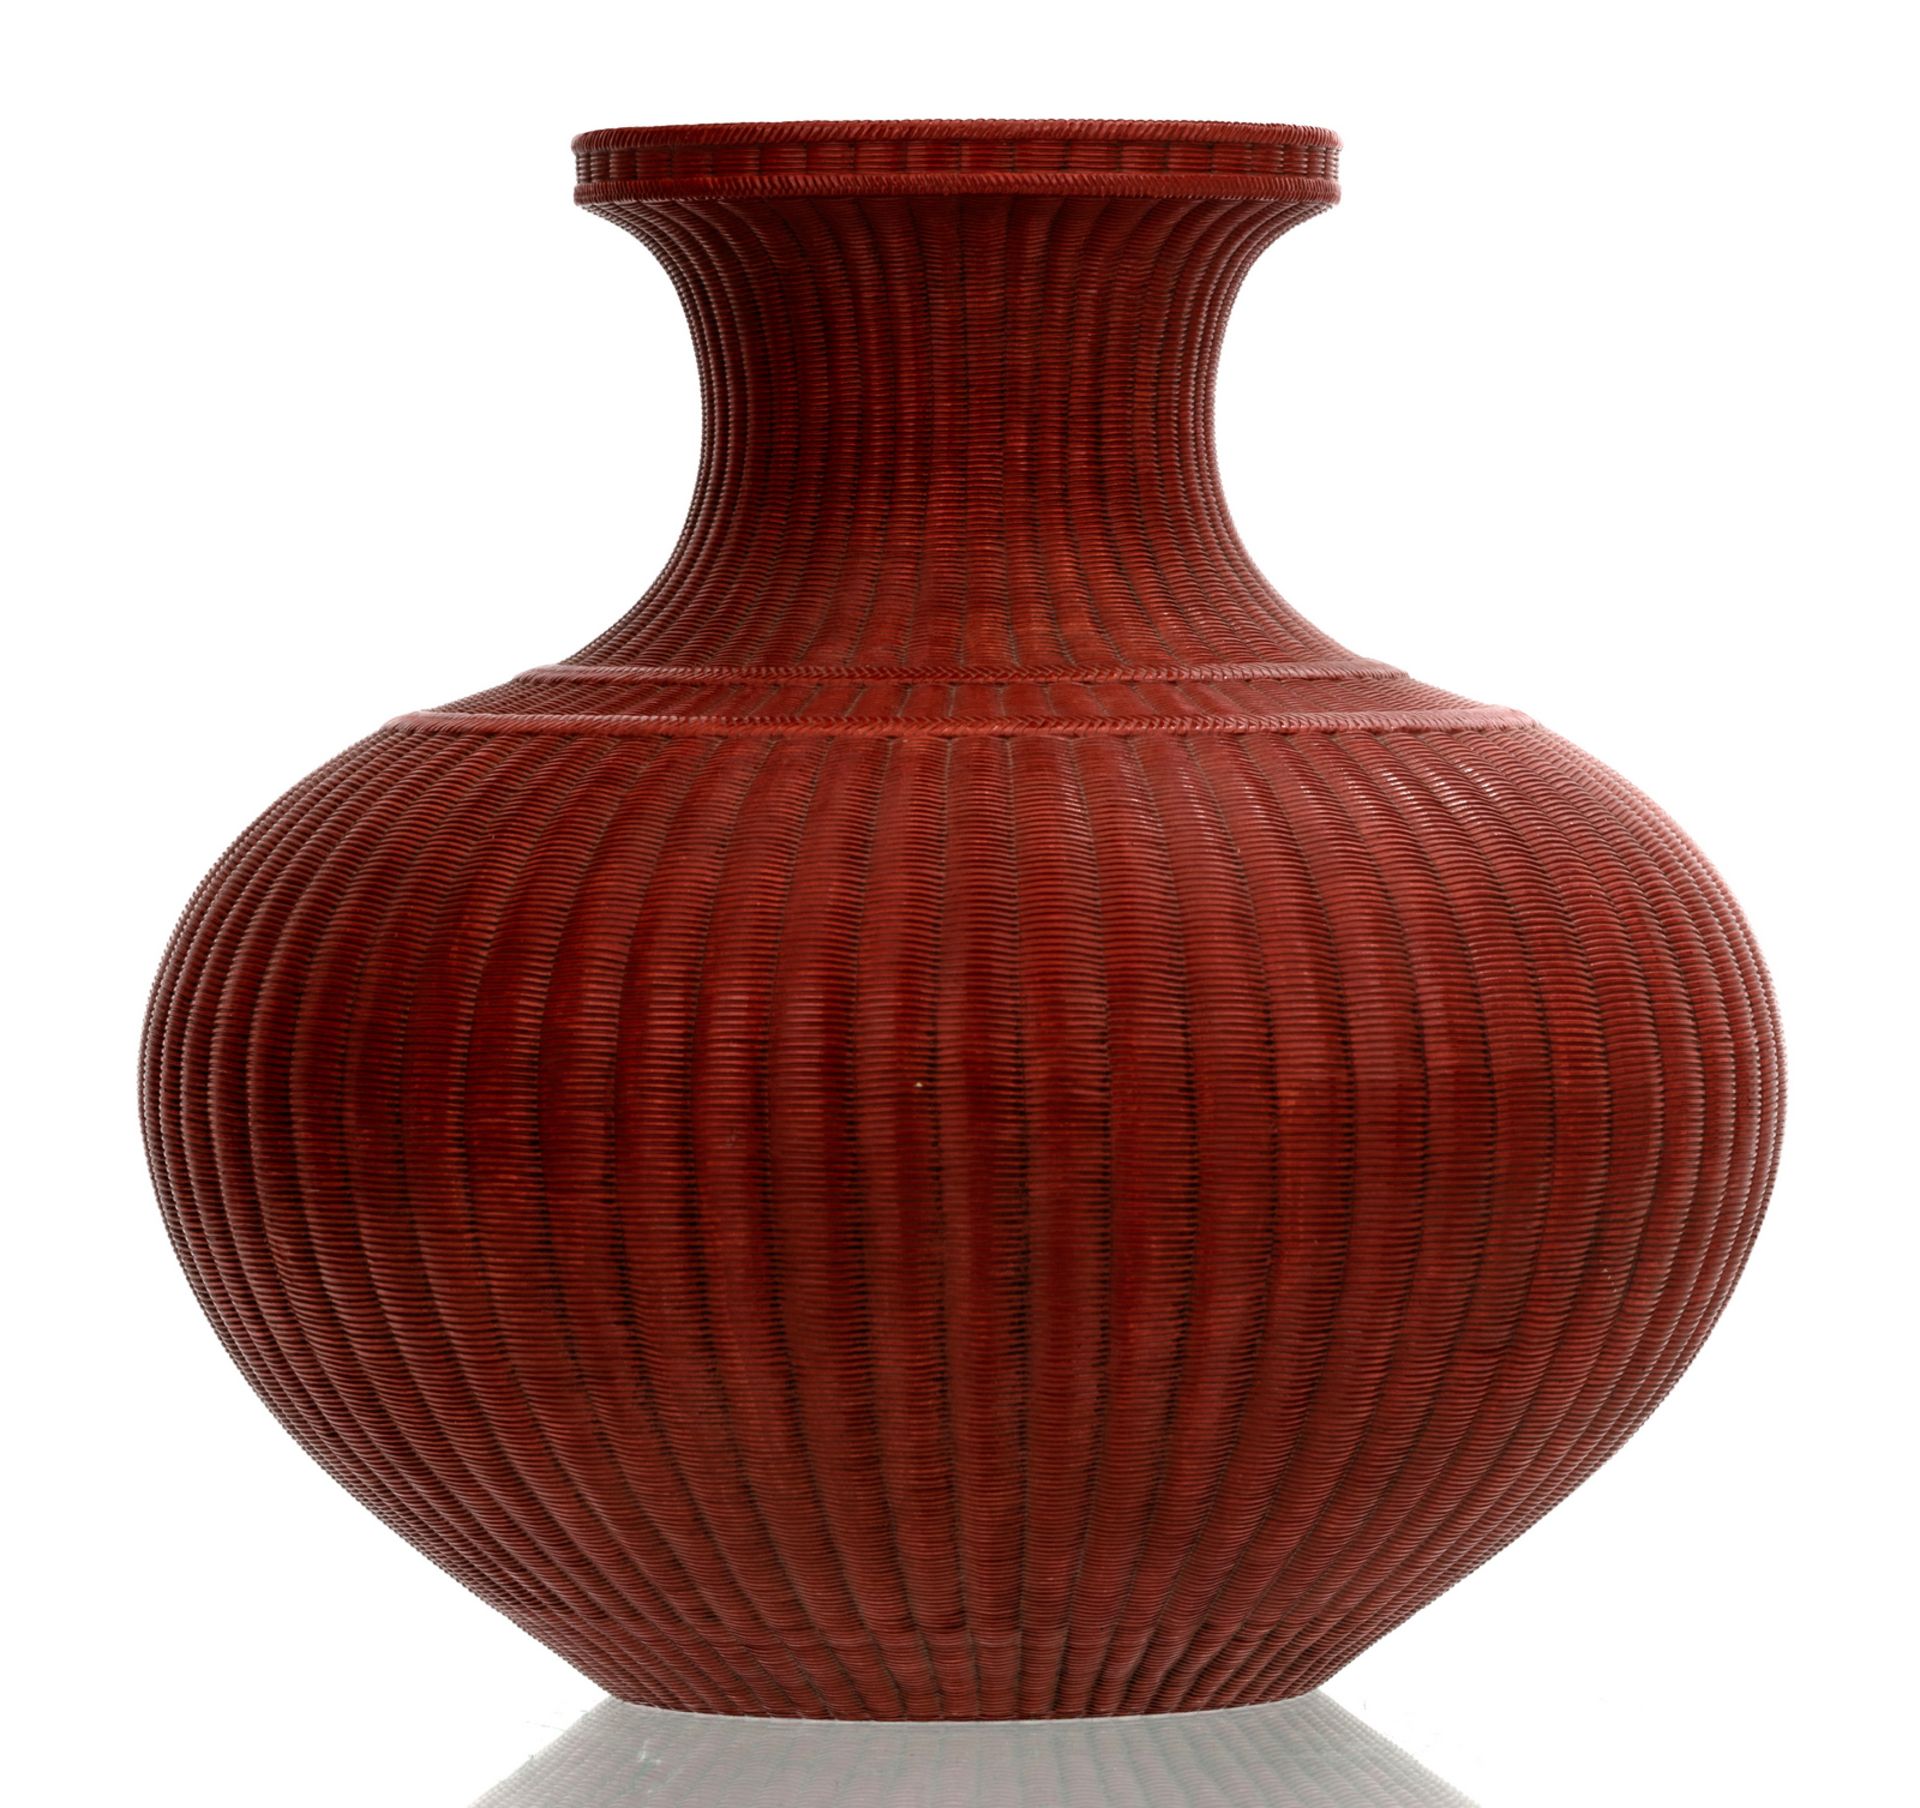 A fine Chinese red brown glazed reed basket shaped vase with a Yongzheng mark, H 40,5 cm - Image 5 of 7